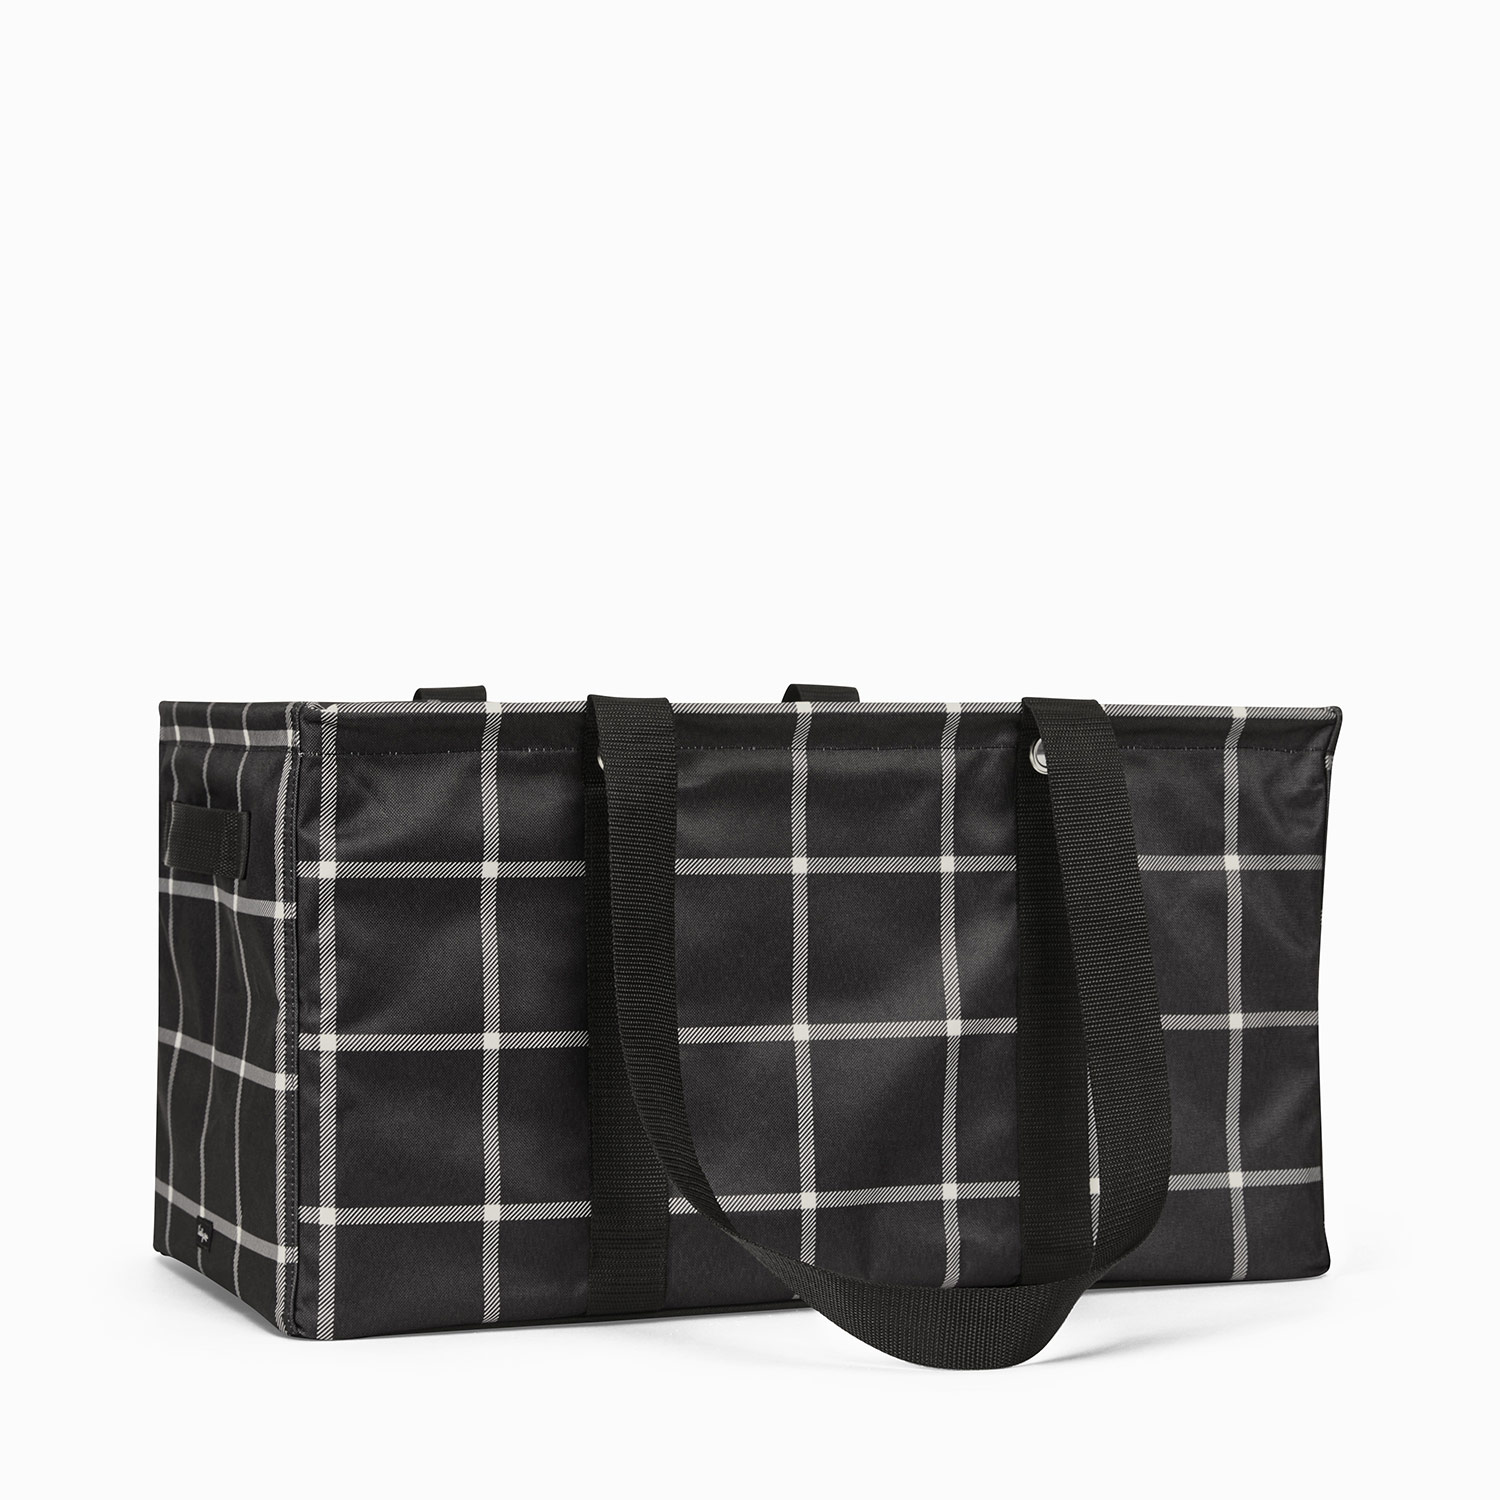 Thirty One DELUXE UTILITY Tote in Holiday Plaid NWT